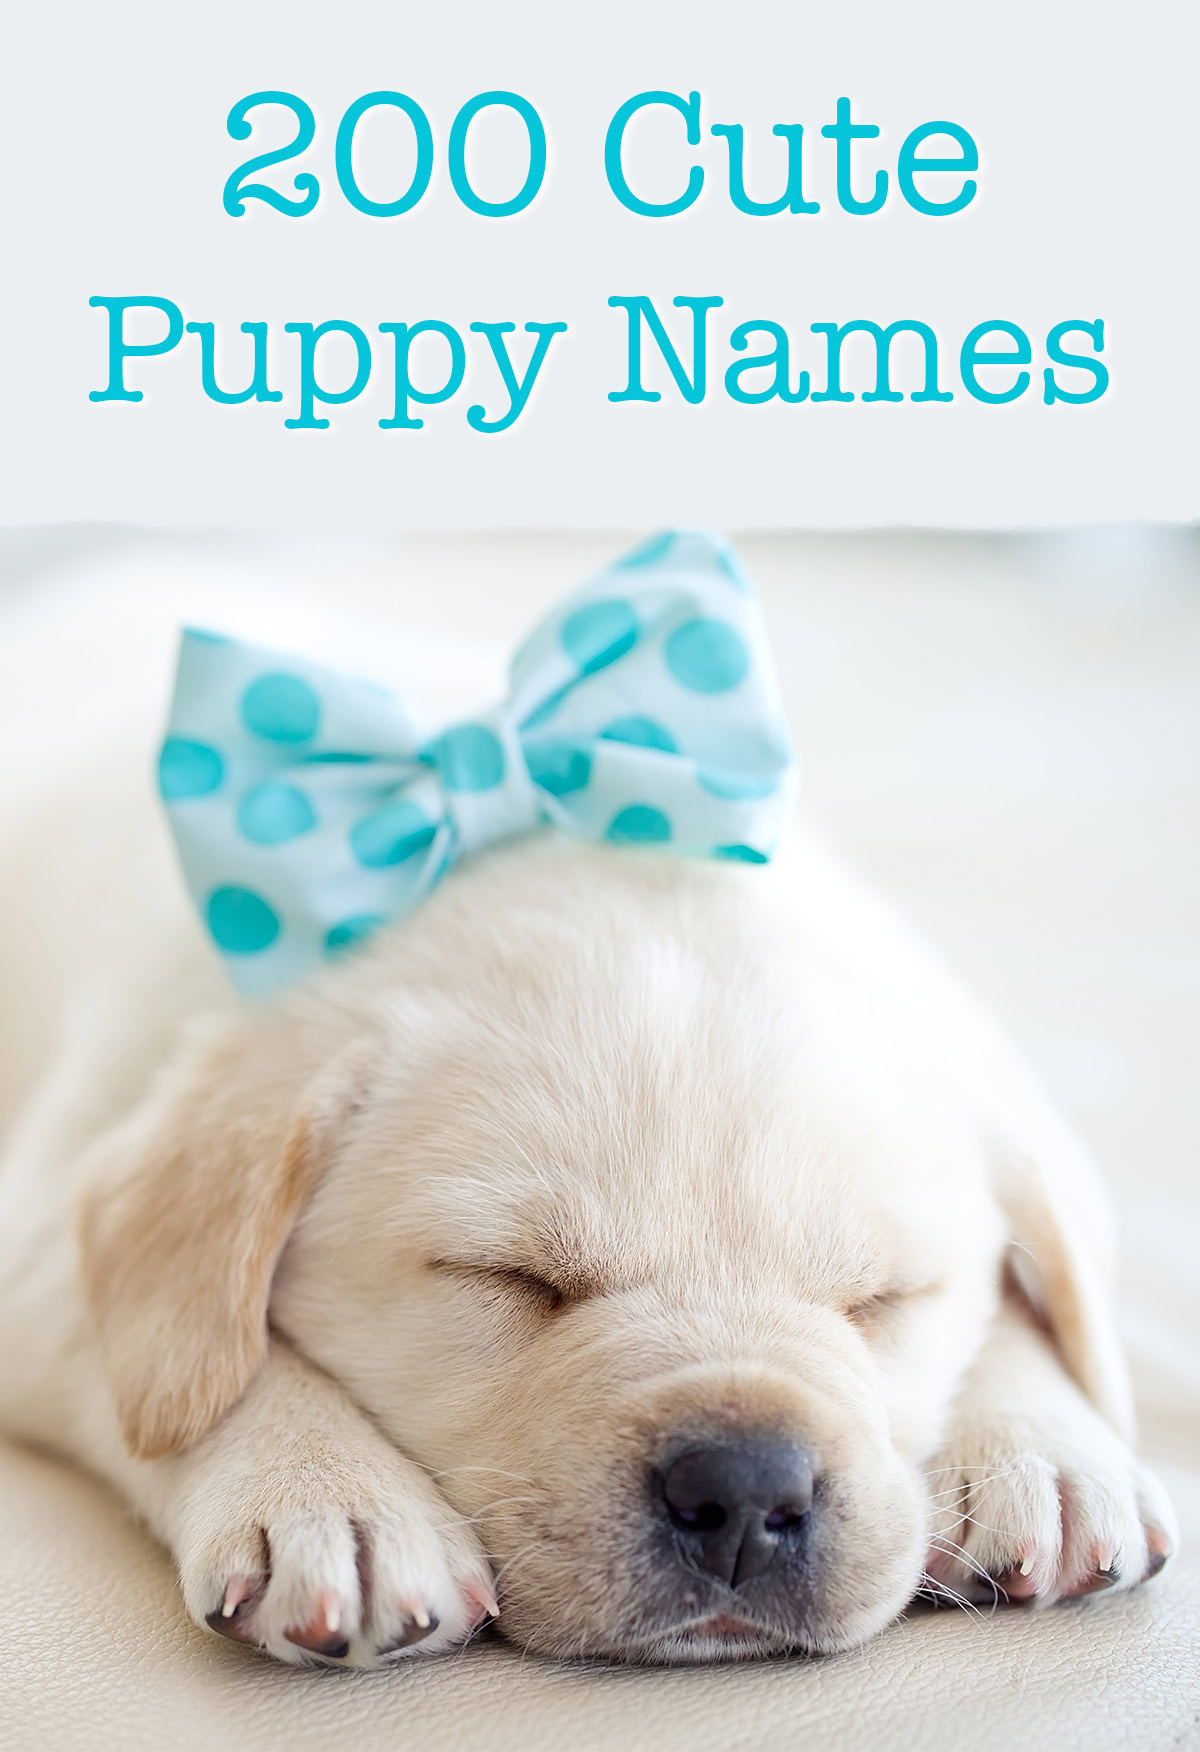 Cute Puppy Names - Over 200 Adorable Ideas For Naming Your Dog